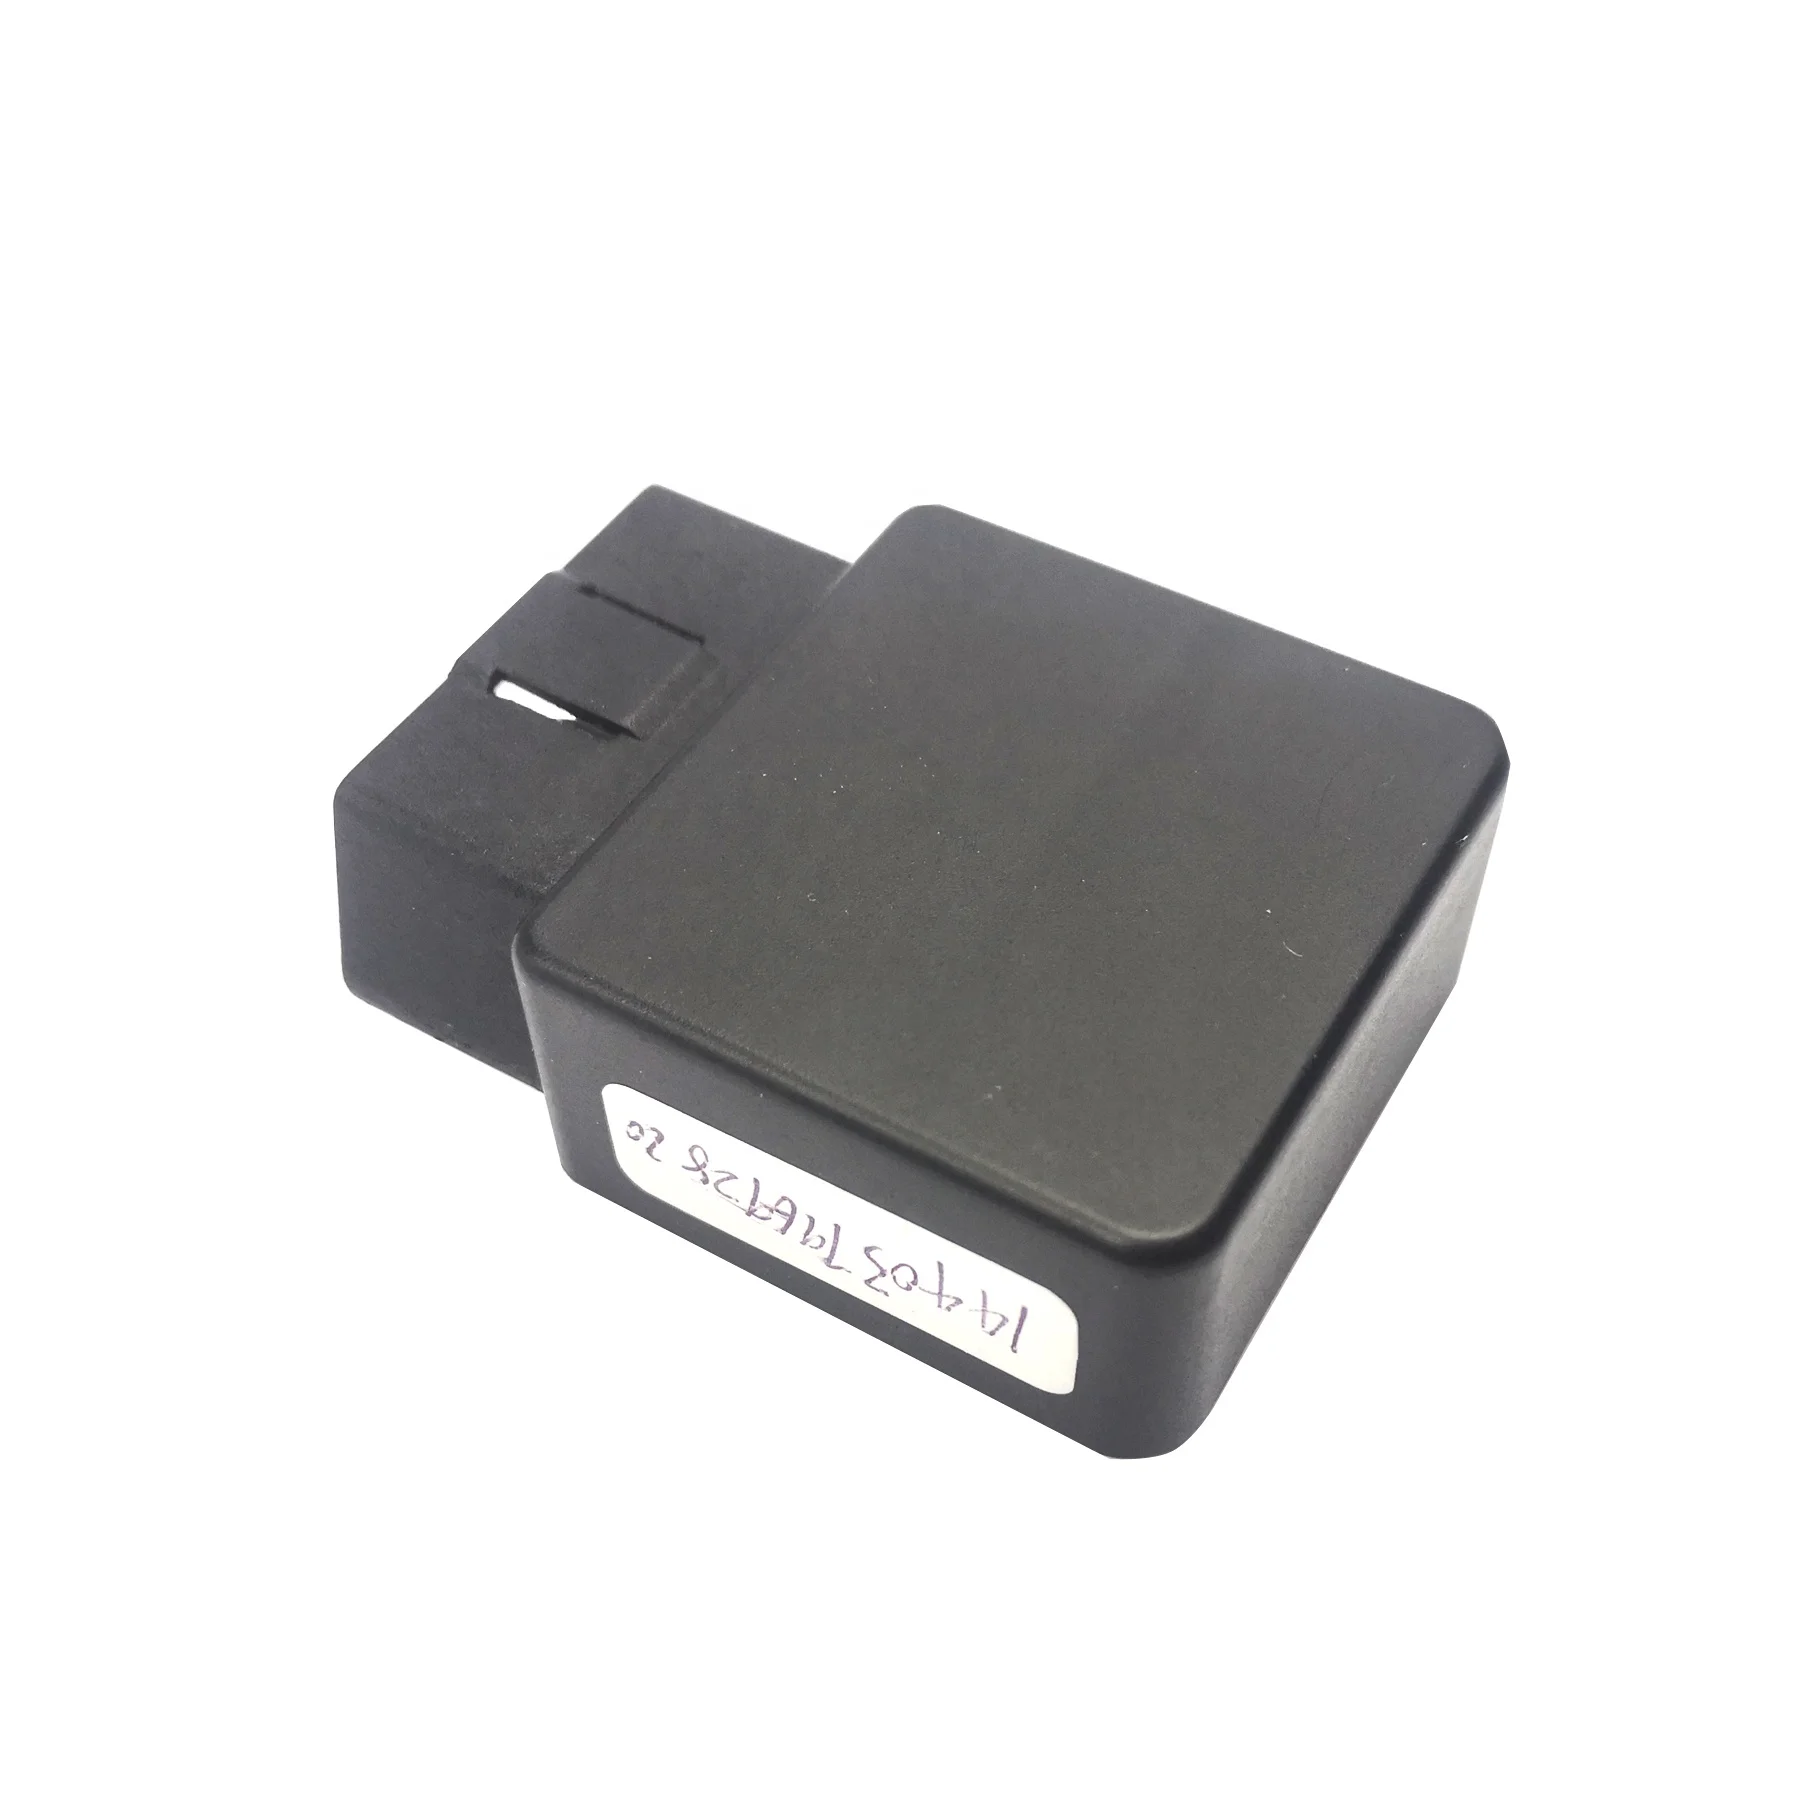 

Wanway Tech 4g Smart Diagnostic Sms Obd Car Gps Tracker GS22 with Fuel Detection wifi connection and overspeed alarm